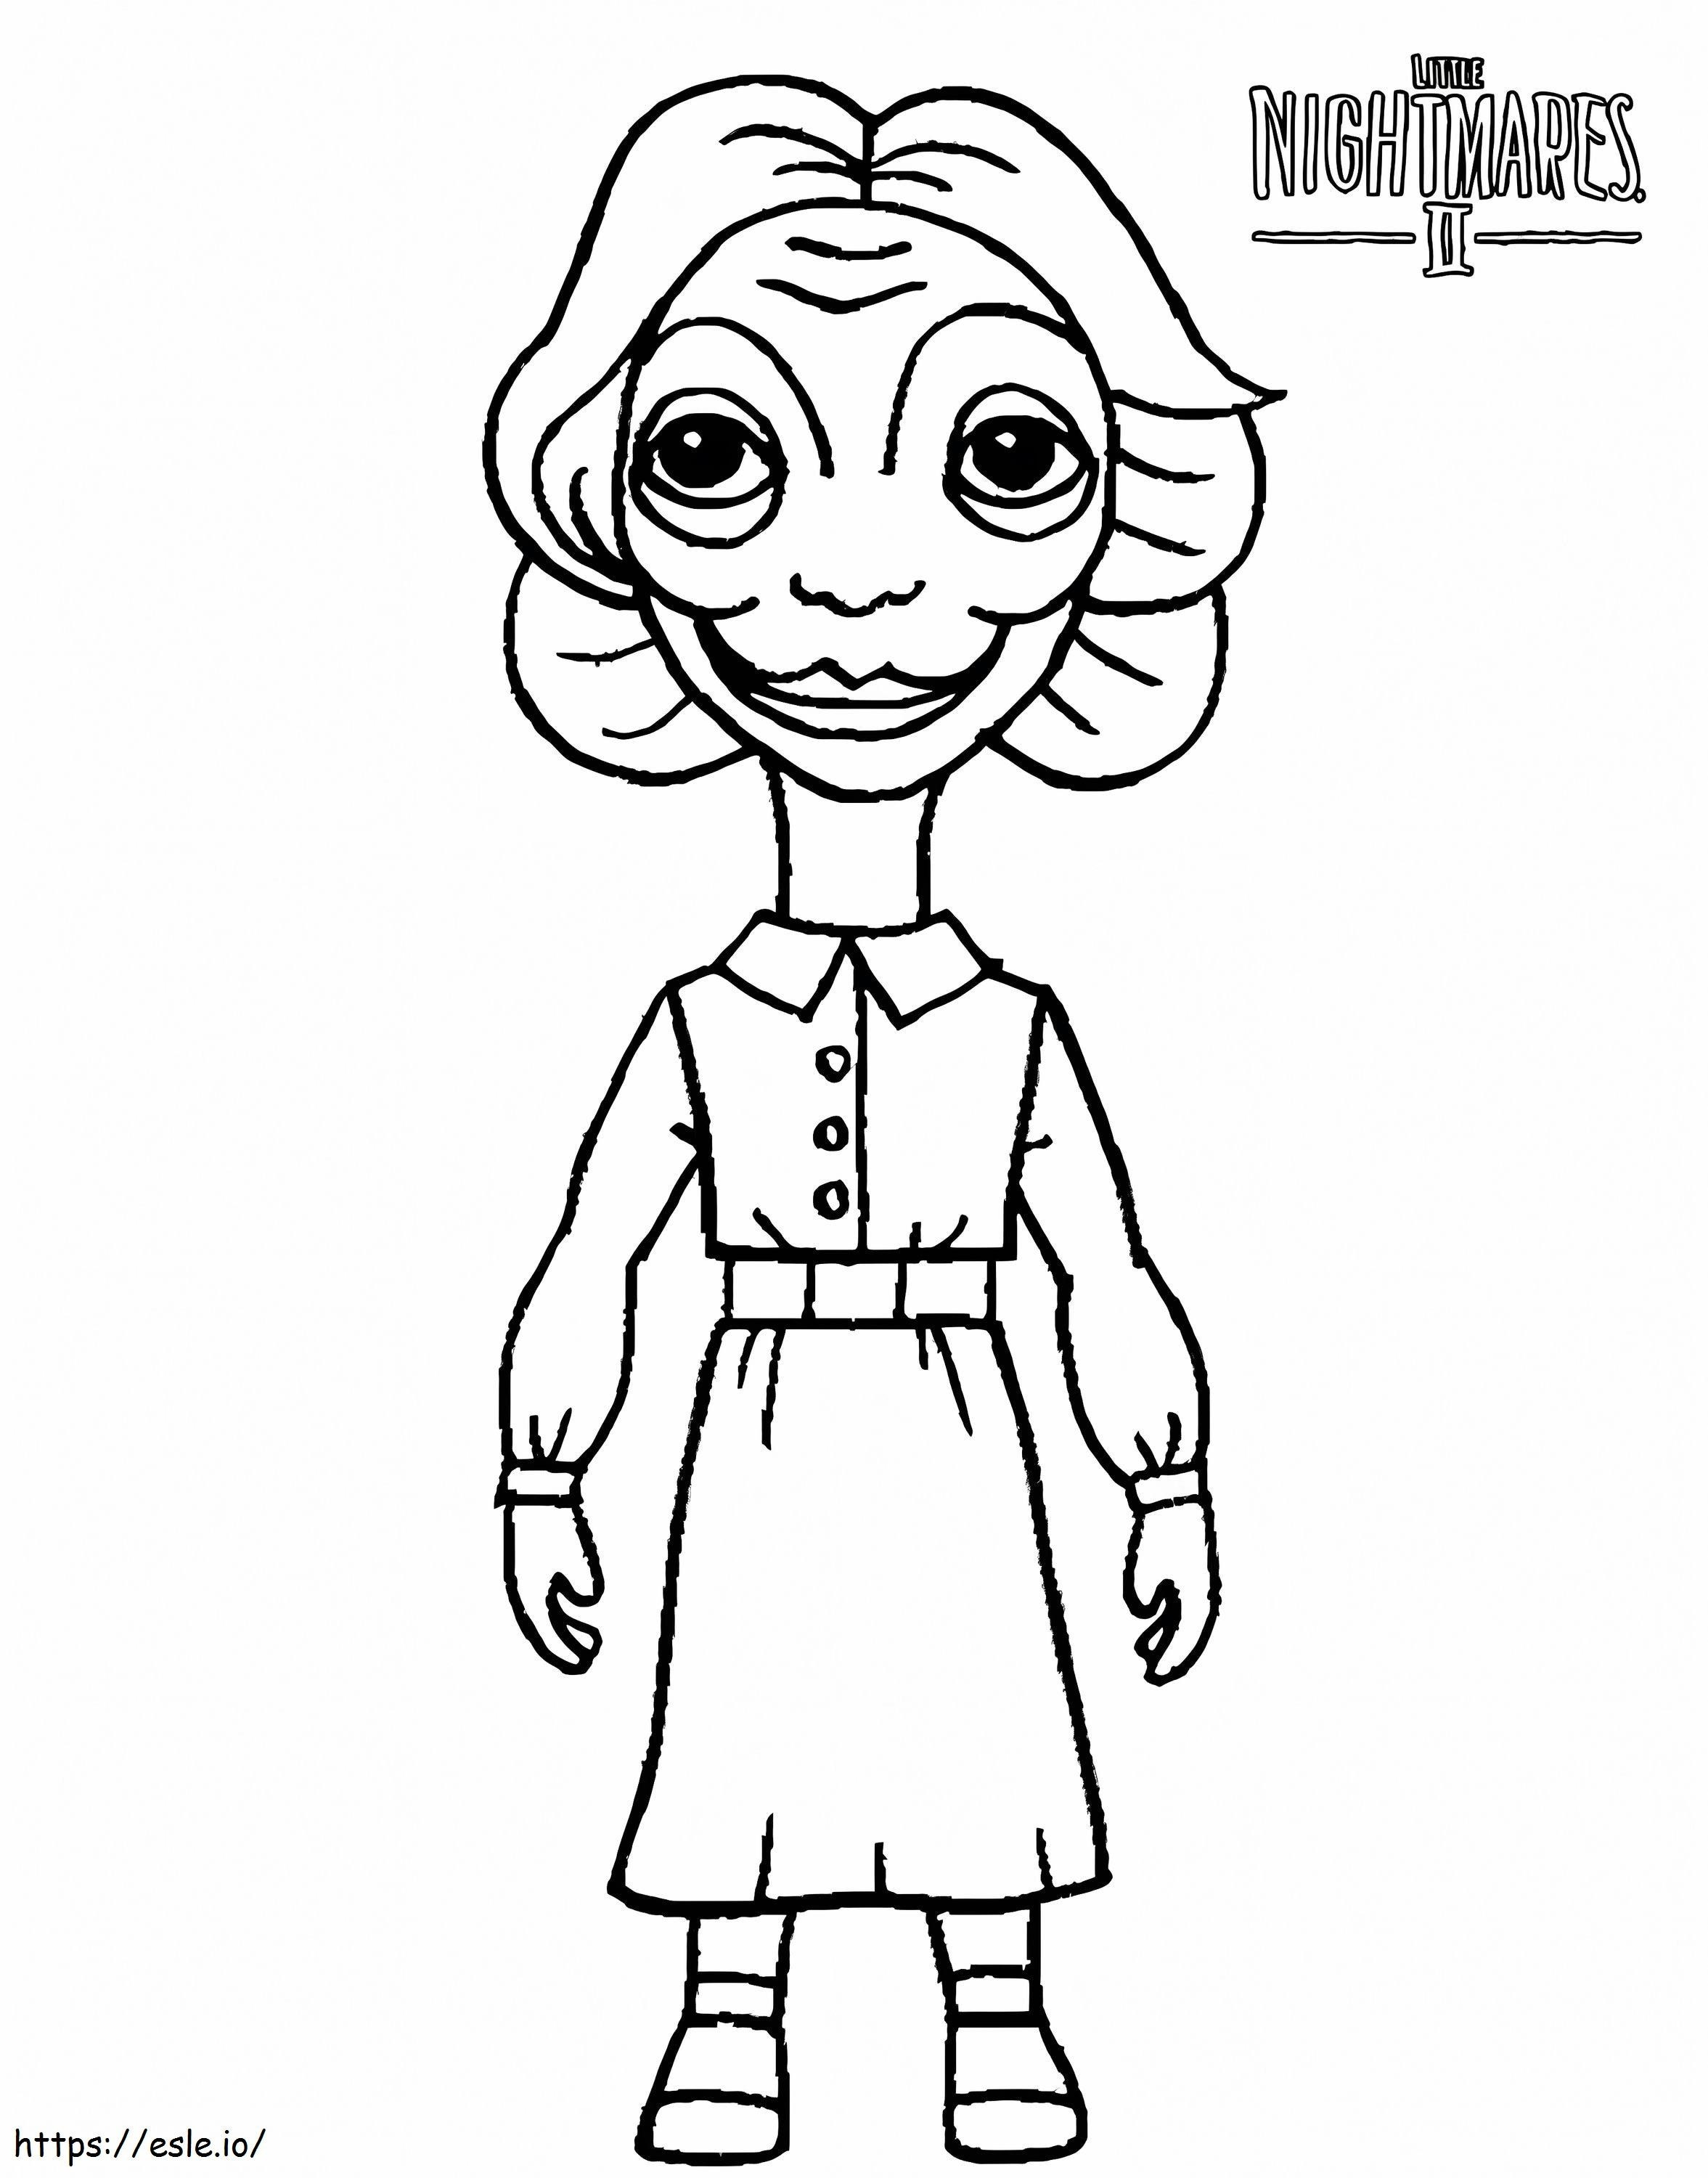 Teacher In Little Nightmares coloring page